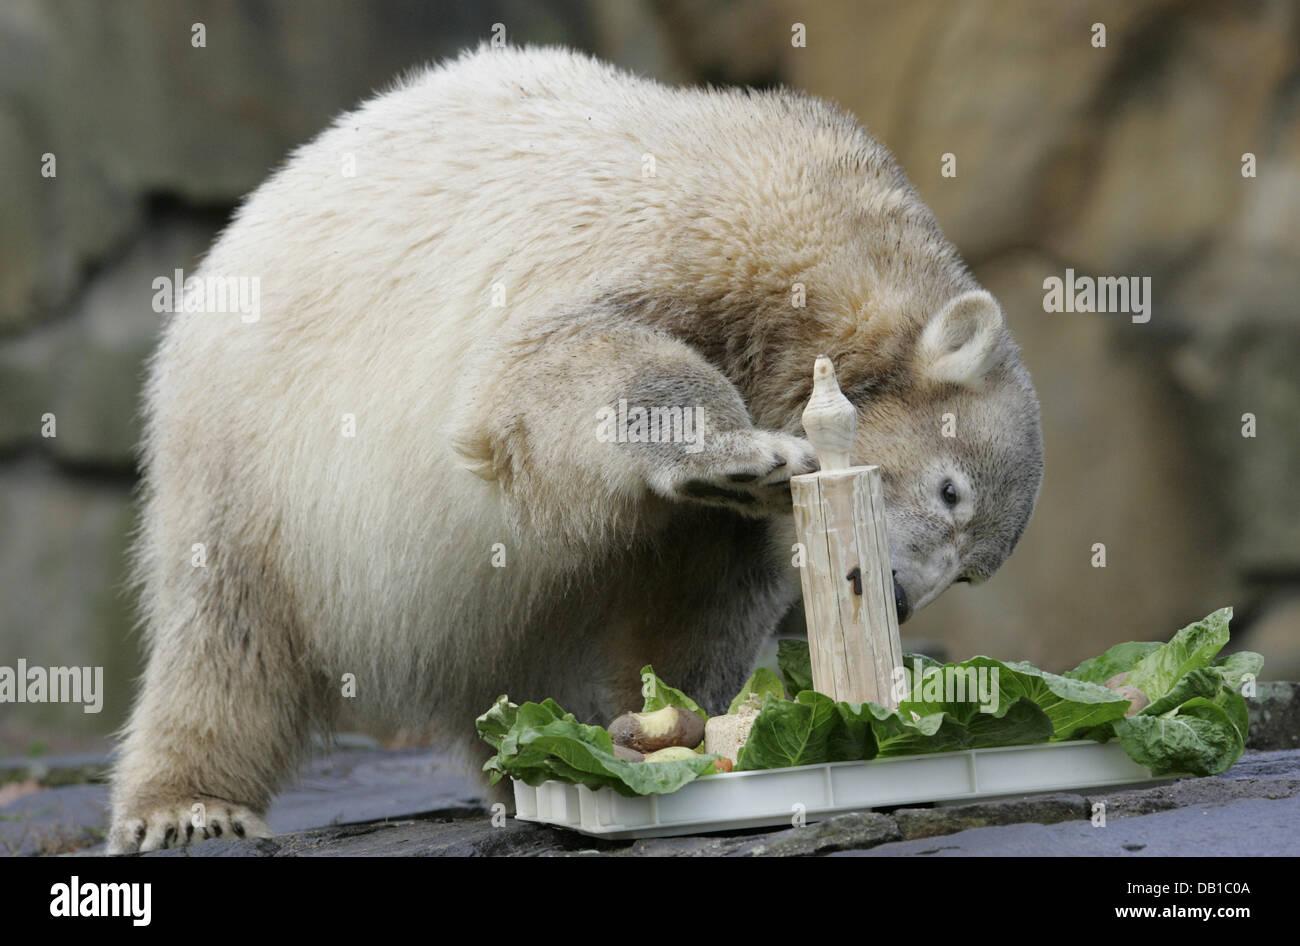 Polar bear Knut nibbles on its wooden candle as it clebrates its first birthday at the zoo in Berlin, 05 December 2007. More than 2.5 million people have already come to see the polar bear. In its first year of life Knut increased its weight from 810 gr to 110 kg. Photo: Rainer Jensen Stock Photo